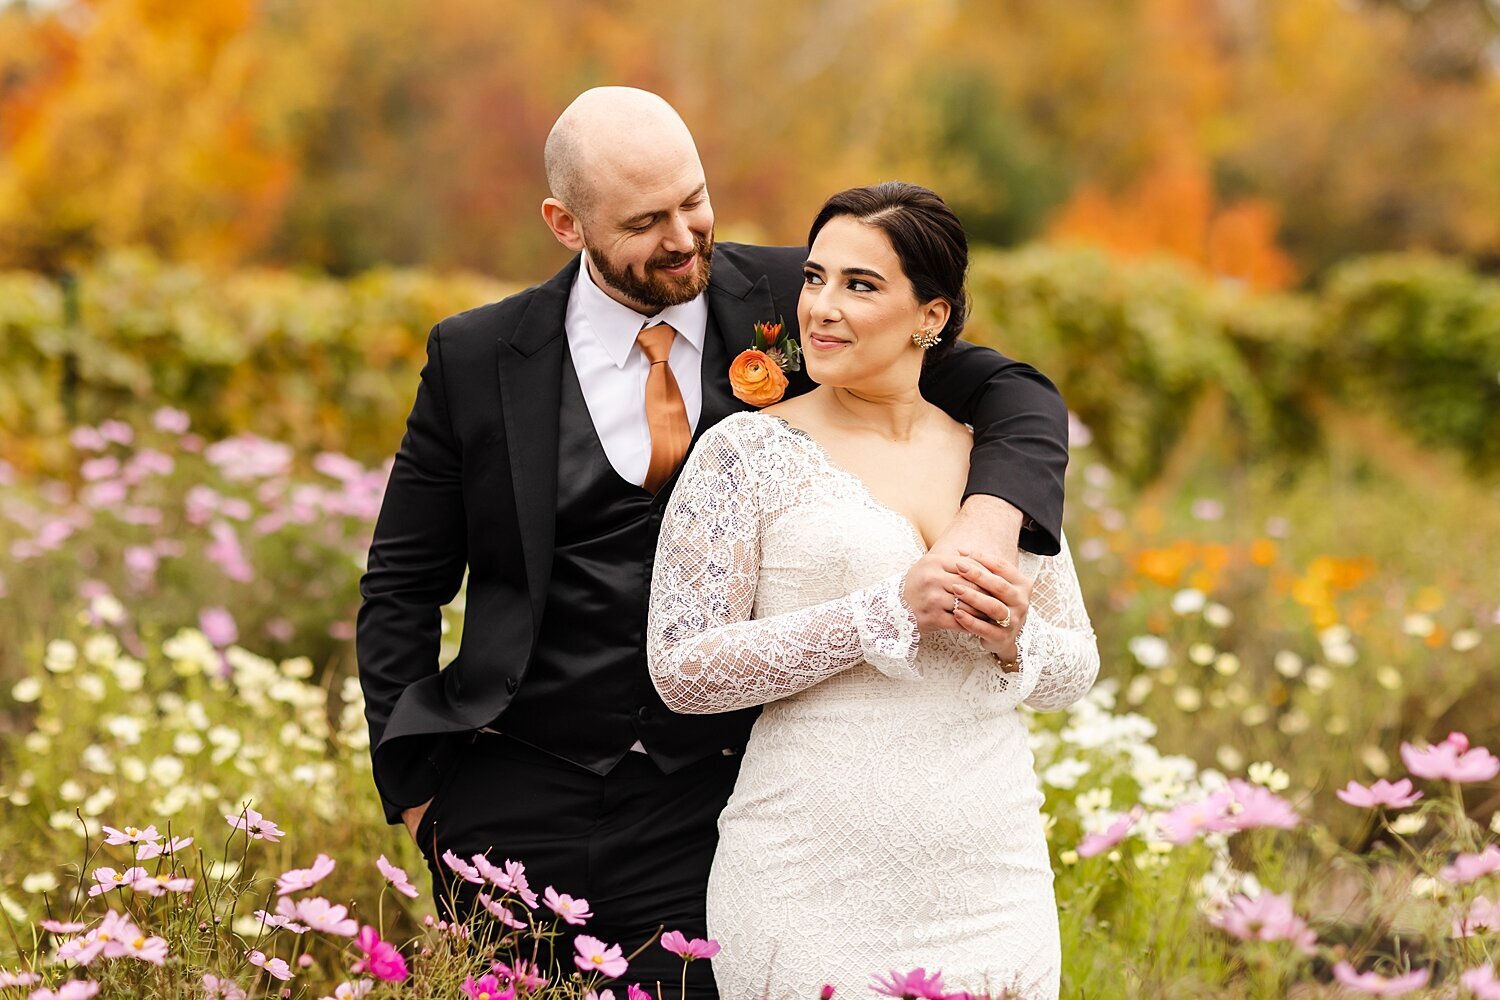 Groom slings his arm over bride's shoulder during portraits at their fall wedding at The Barn at Bradstreet Farm in Rowley, Massachusetts